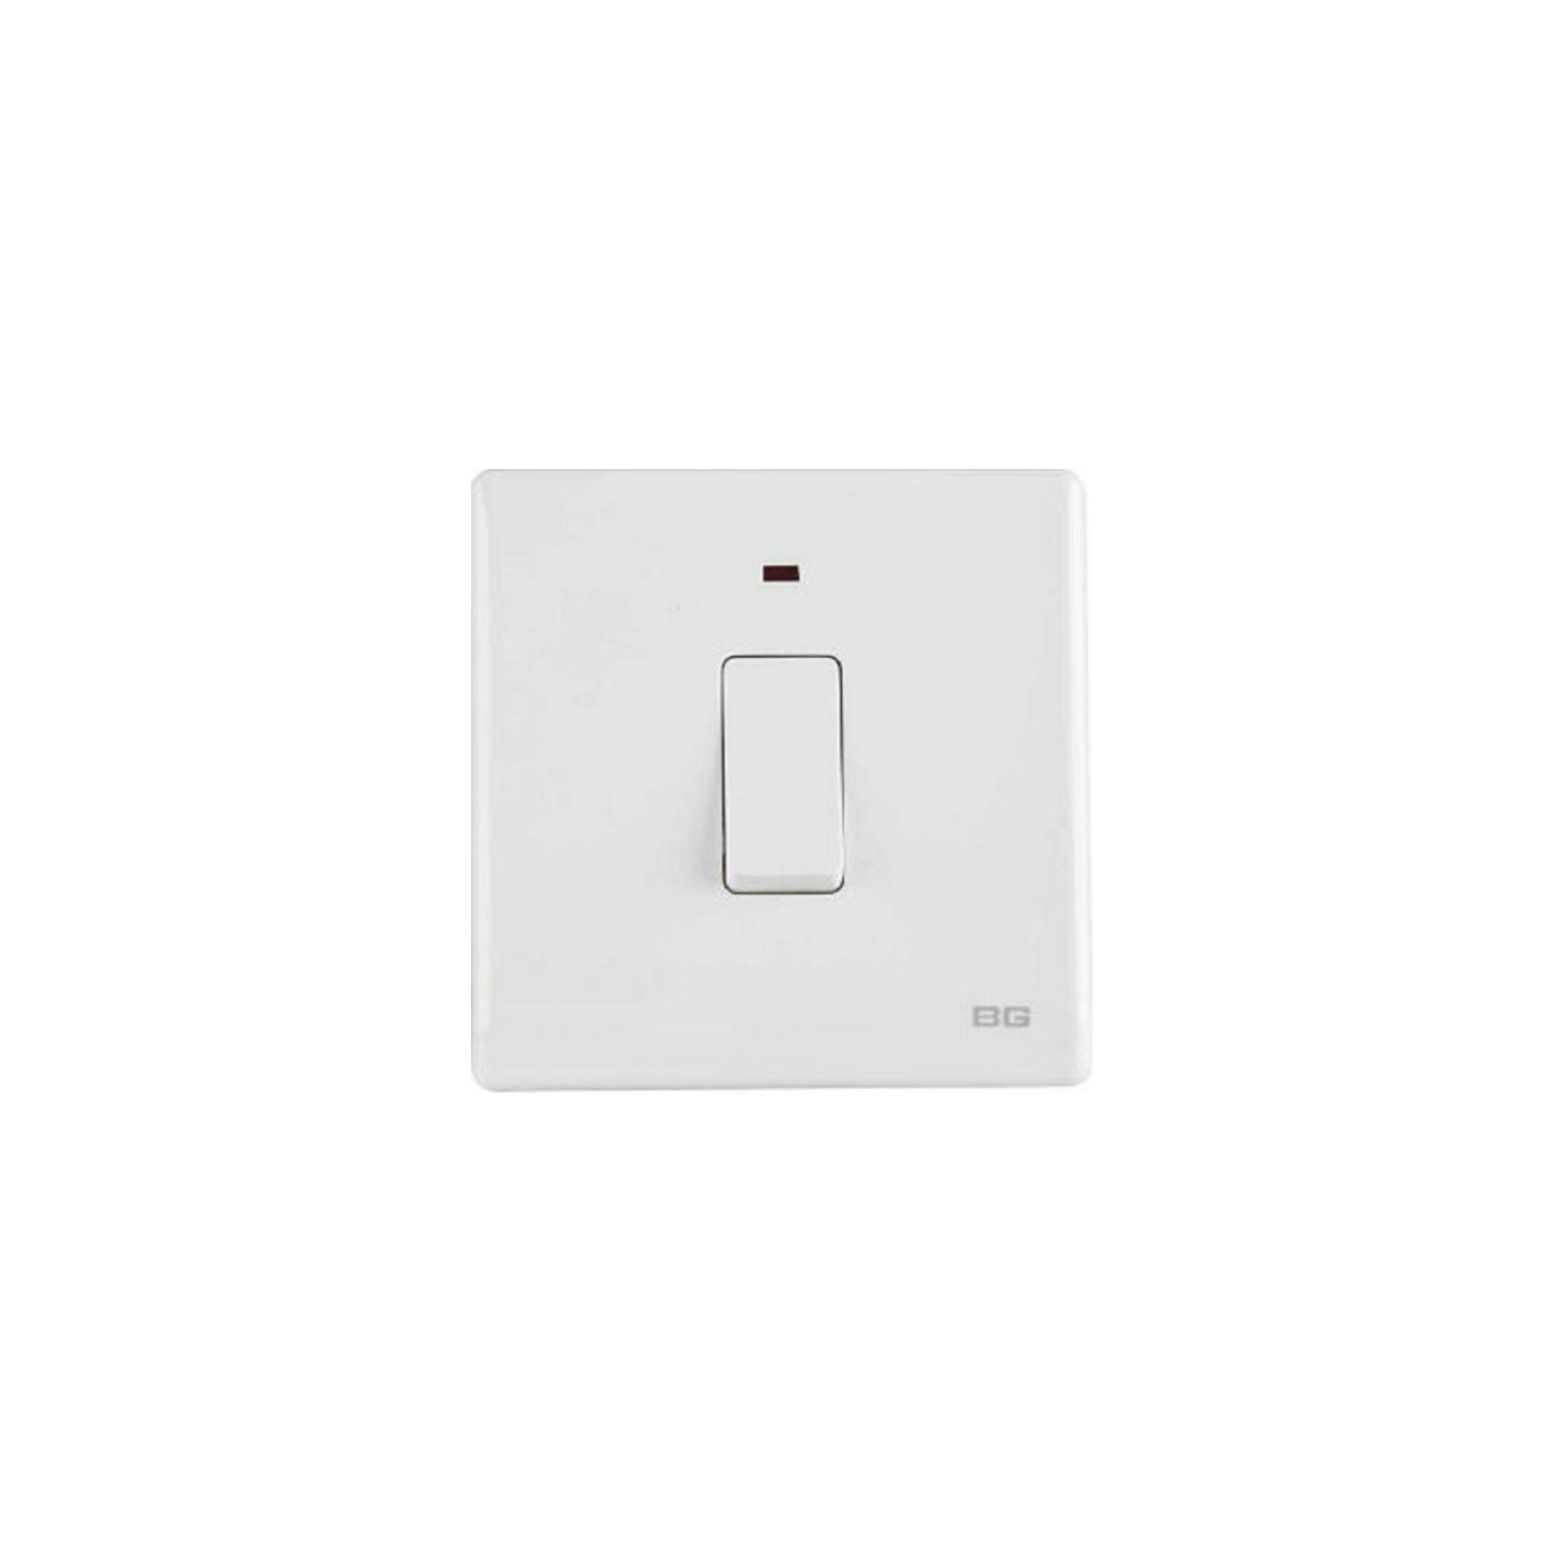 White SlimLine 20Amp Double Pole Switch, high power consumption metal frontplate (PCWH31)